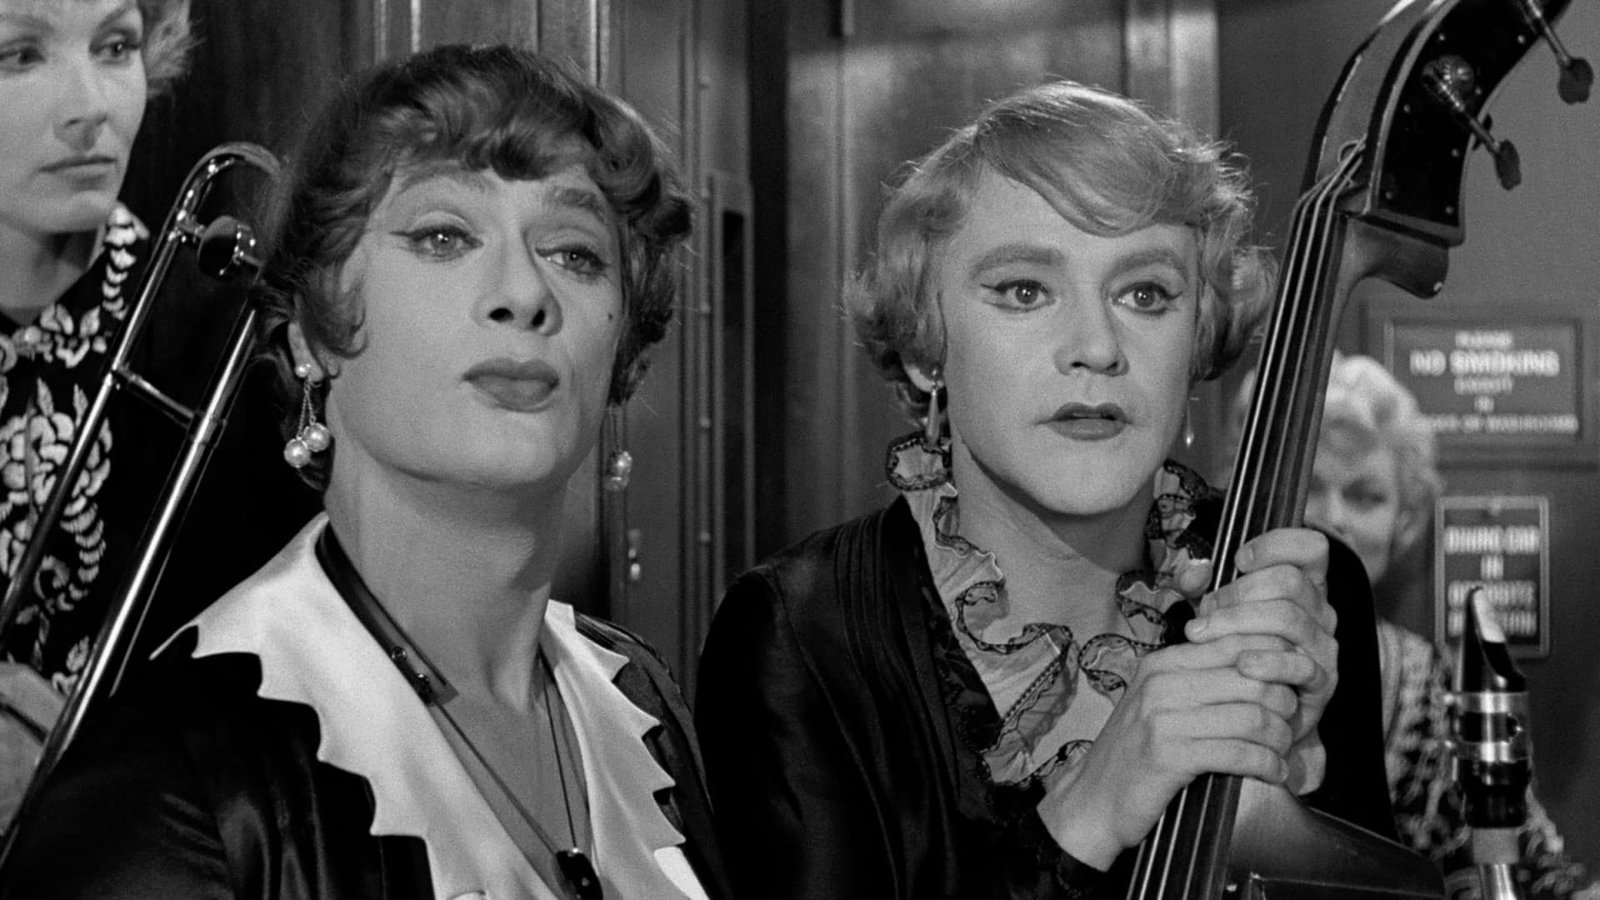 Best Marilyn Monroe Movies Ranked - Some Like It Hot